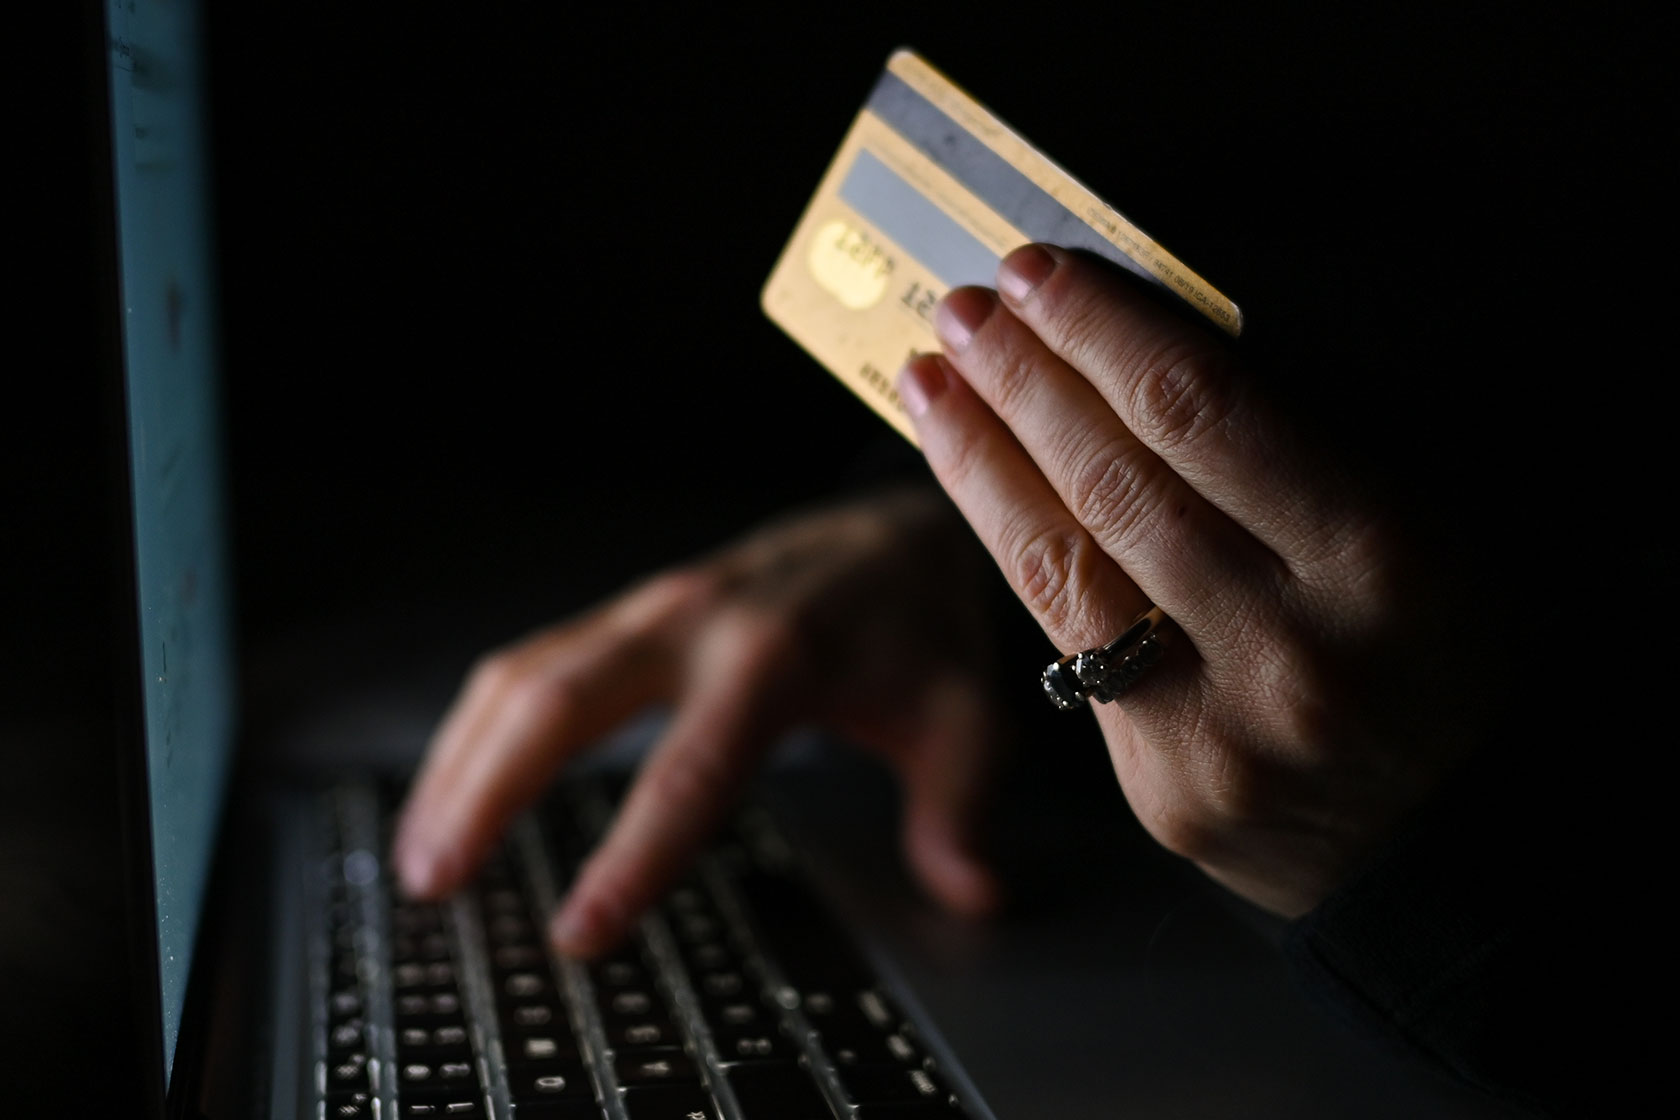 Photo shows a closeup of a hand holding a credit card in front of a laptop